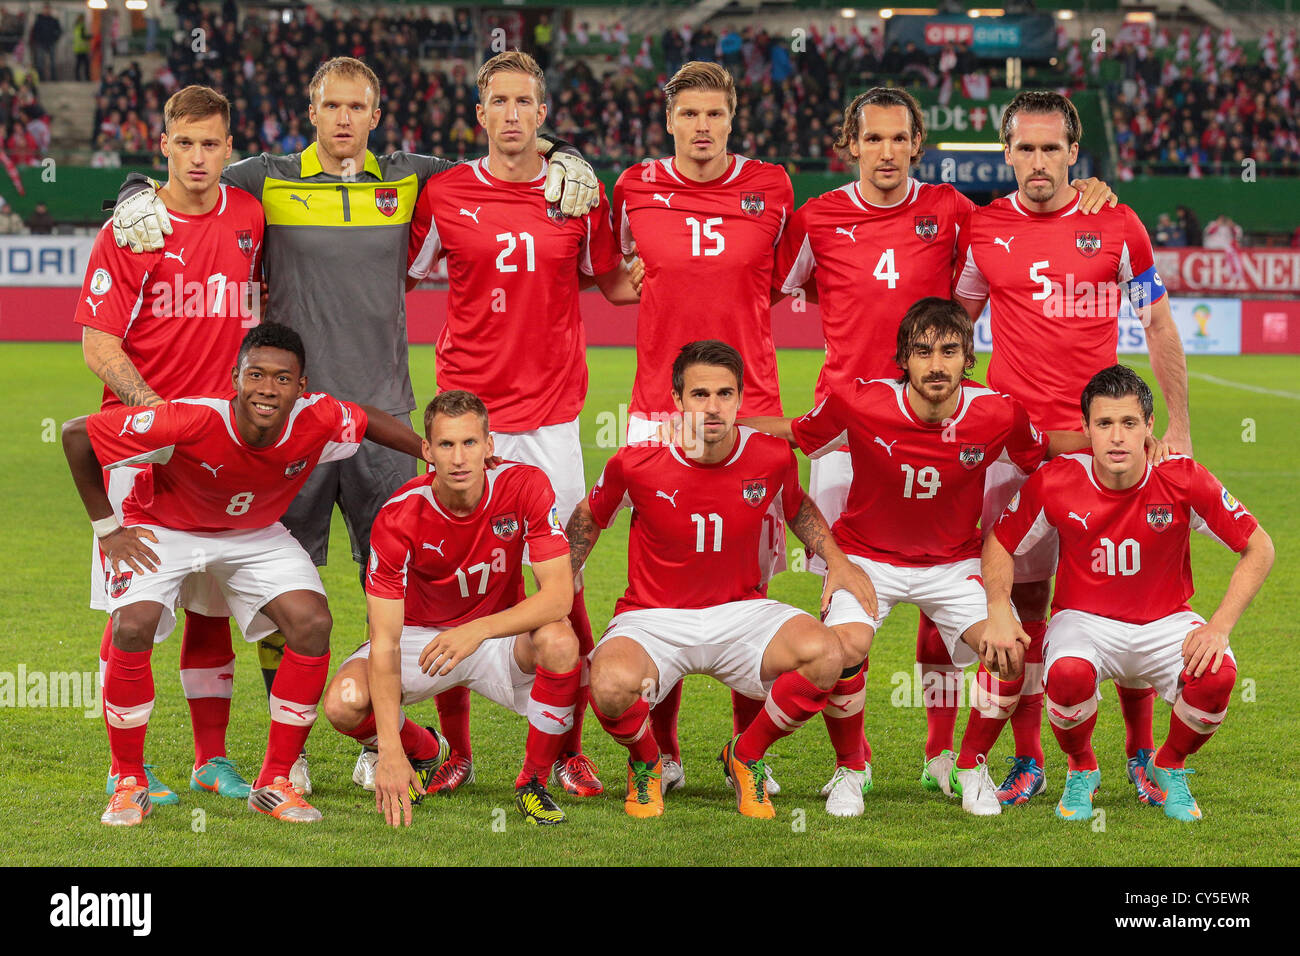 VIENNA, AUSTRIA - OCTOBER 16 The Austrian team poses before the WC qualifier soccer game on October 16, 2012 in Vienna, Austria. Stock Photo